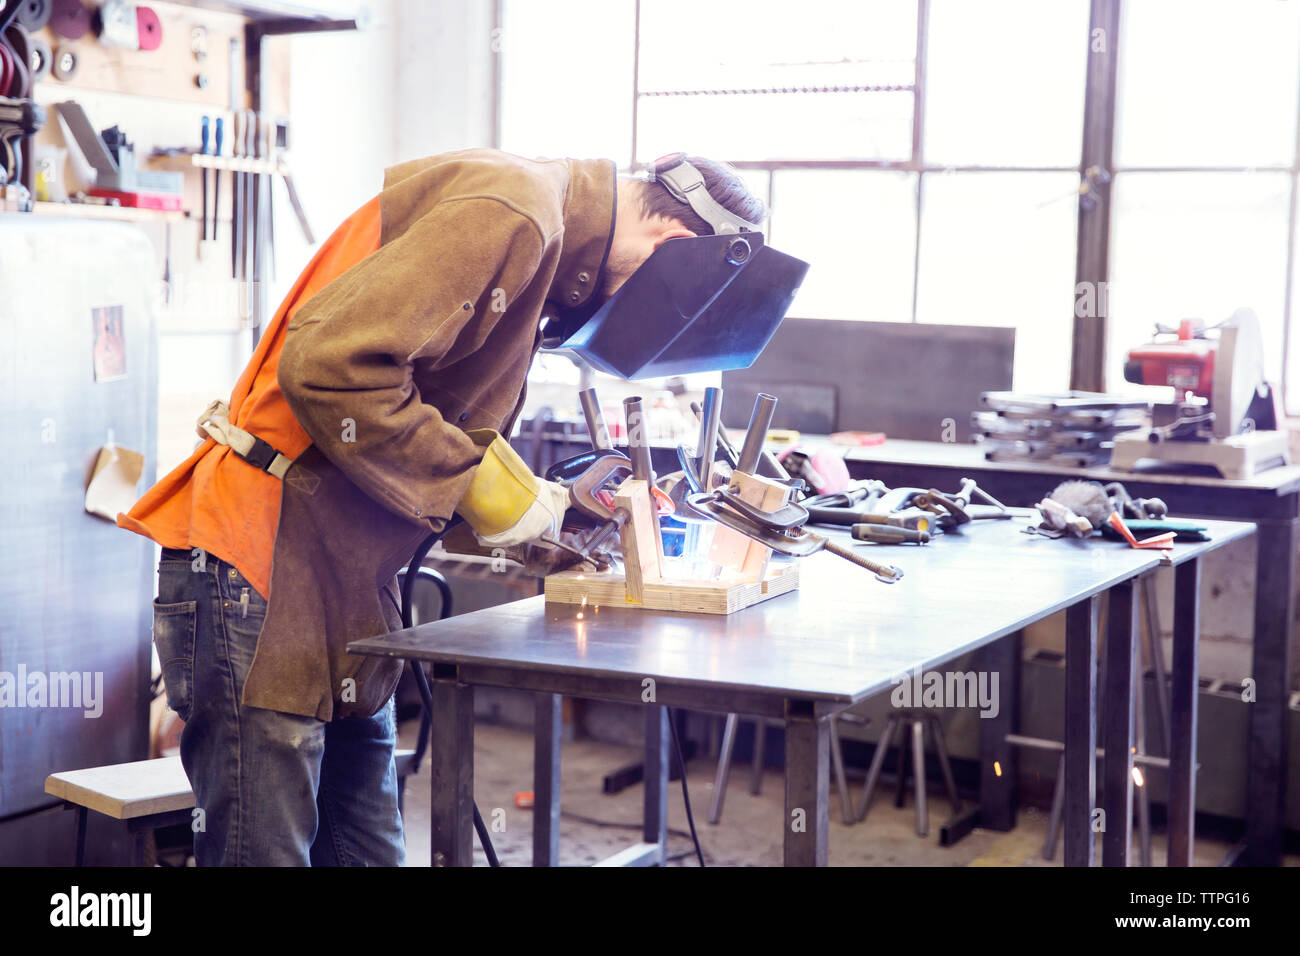 Male craftsperson welding metal at wood shop Stock Photo